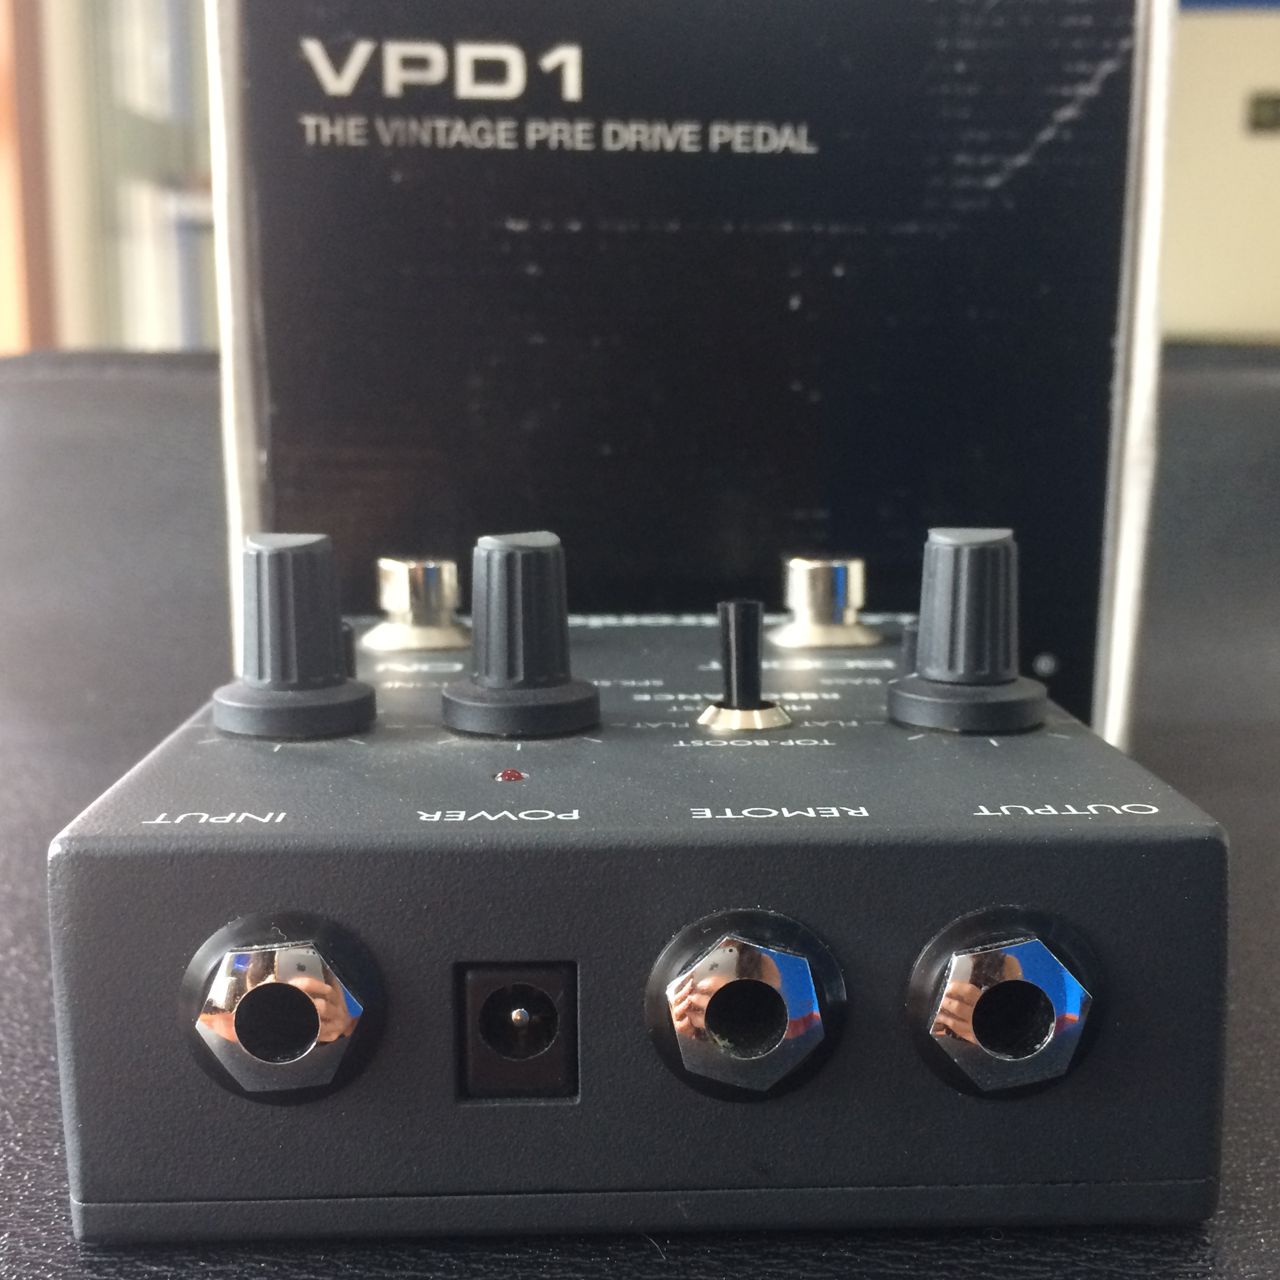 TC Electronic VPD 1, vintage pre-drive. Made in Denmark